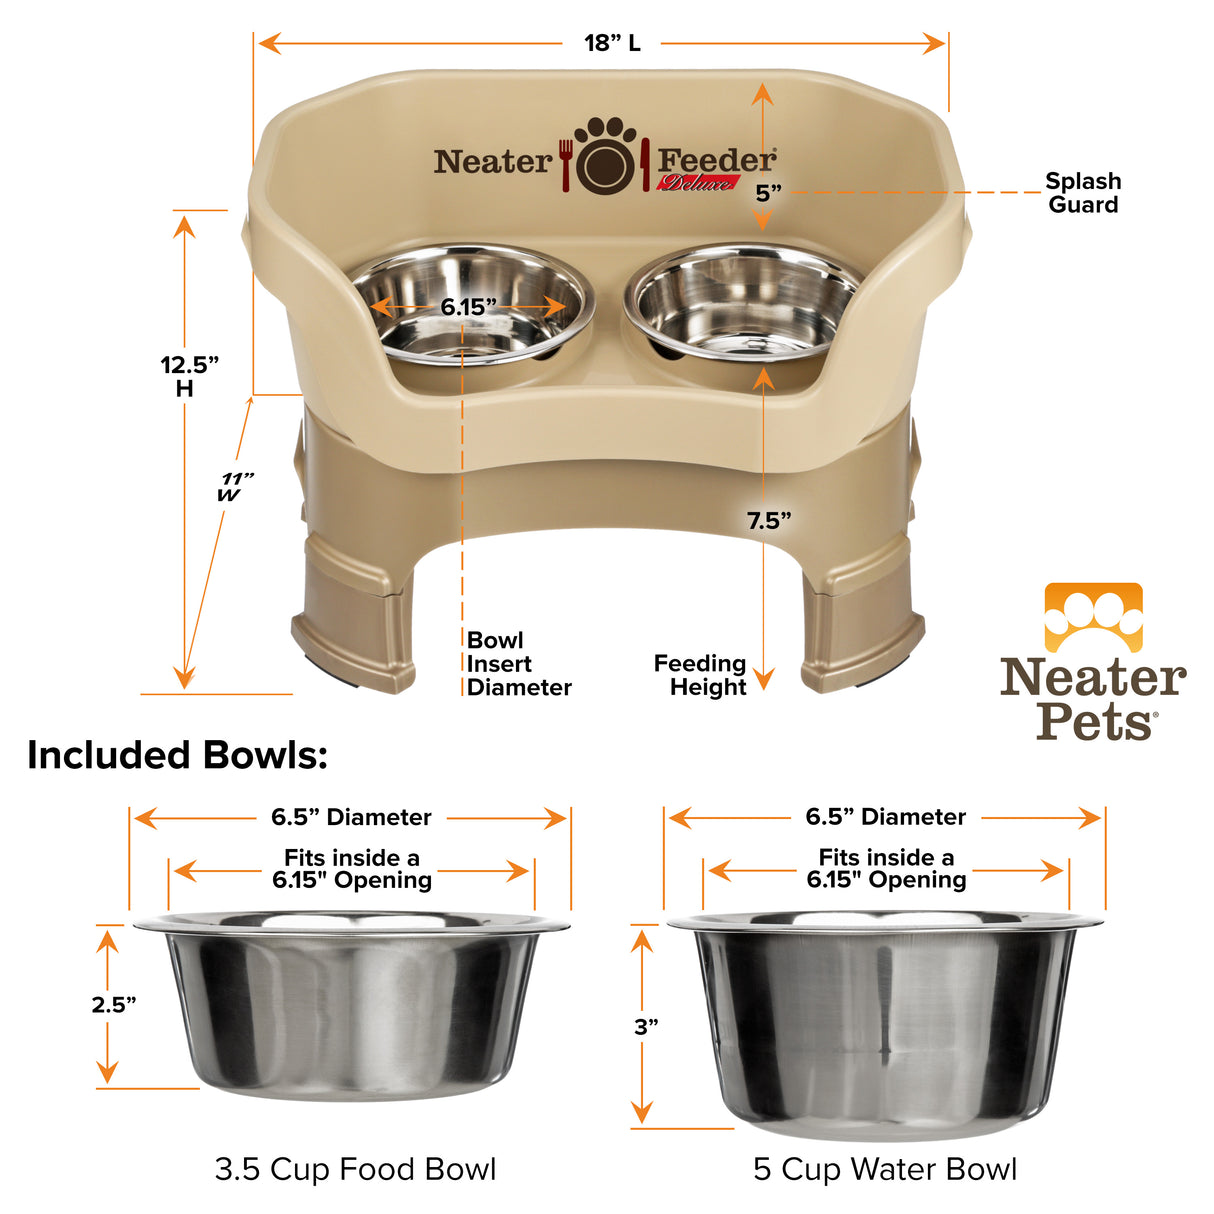 Deluxe Cappuccino Medium Dog Neater Feeder with leg extensions and Bowl dimensions